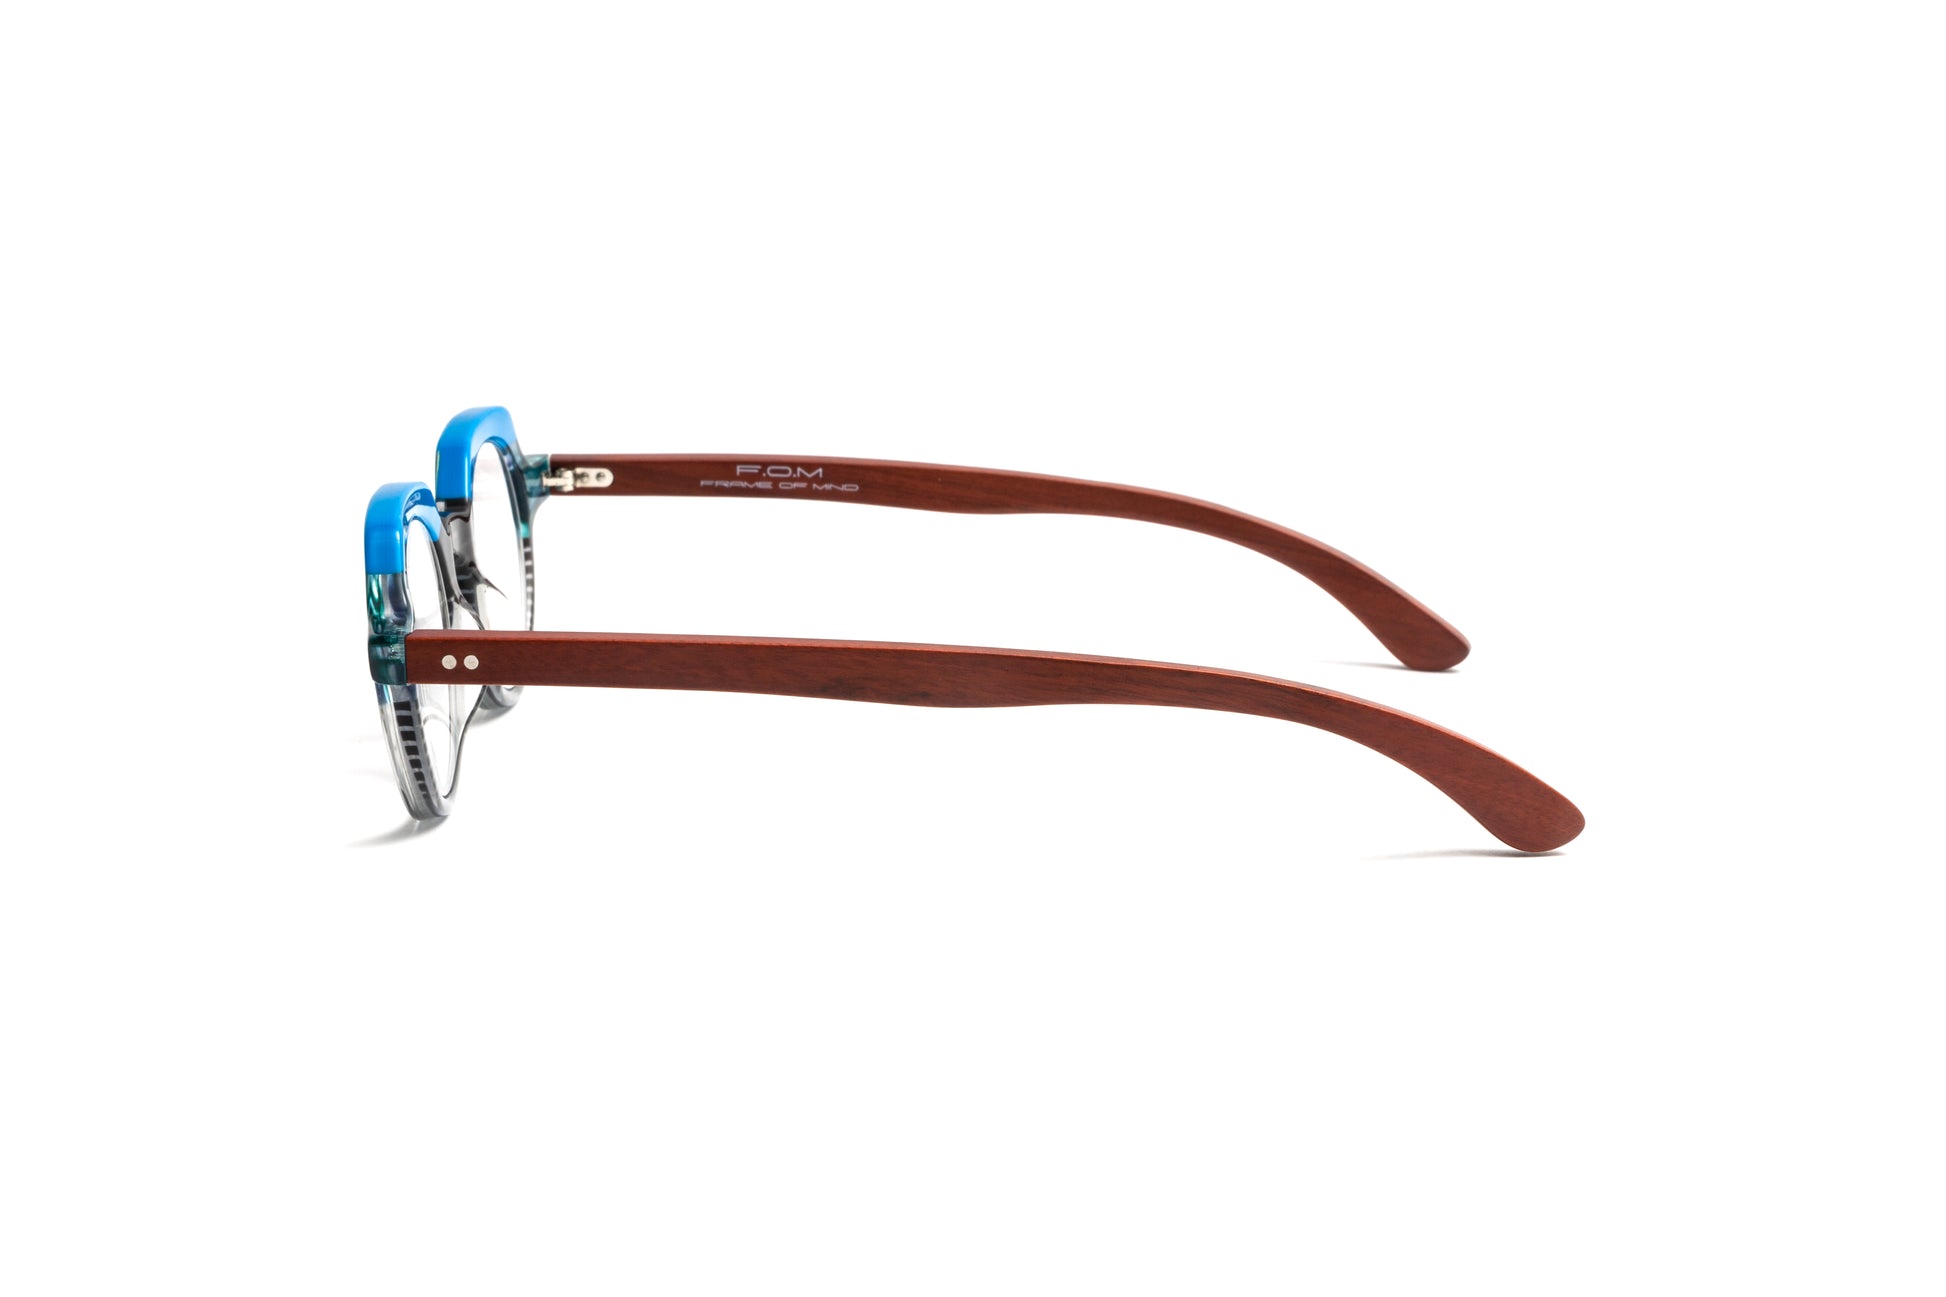 St Barths multi colored blue, aqua, black, and clear unisex round reading glasses with cherry wood temples by Eyejets